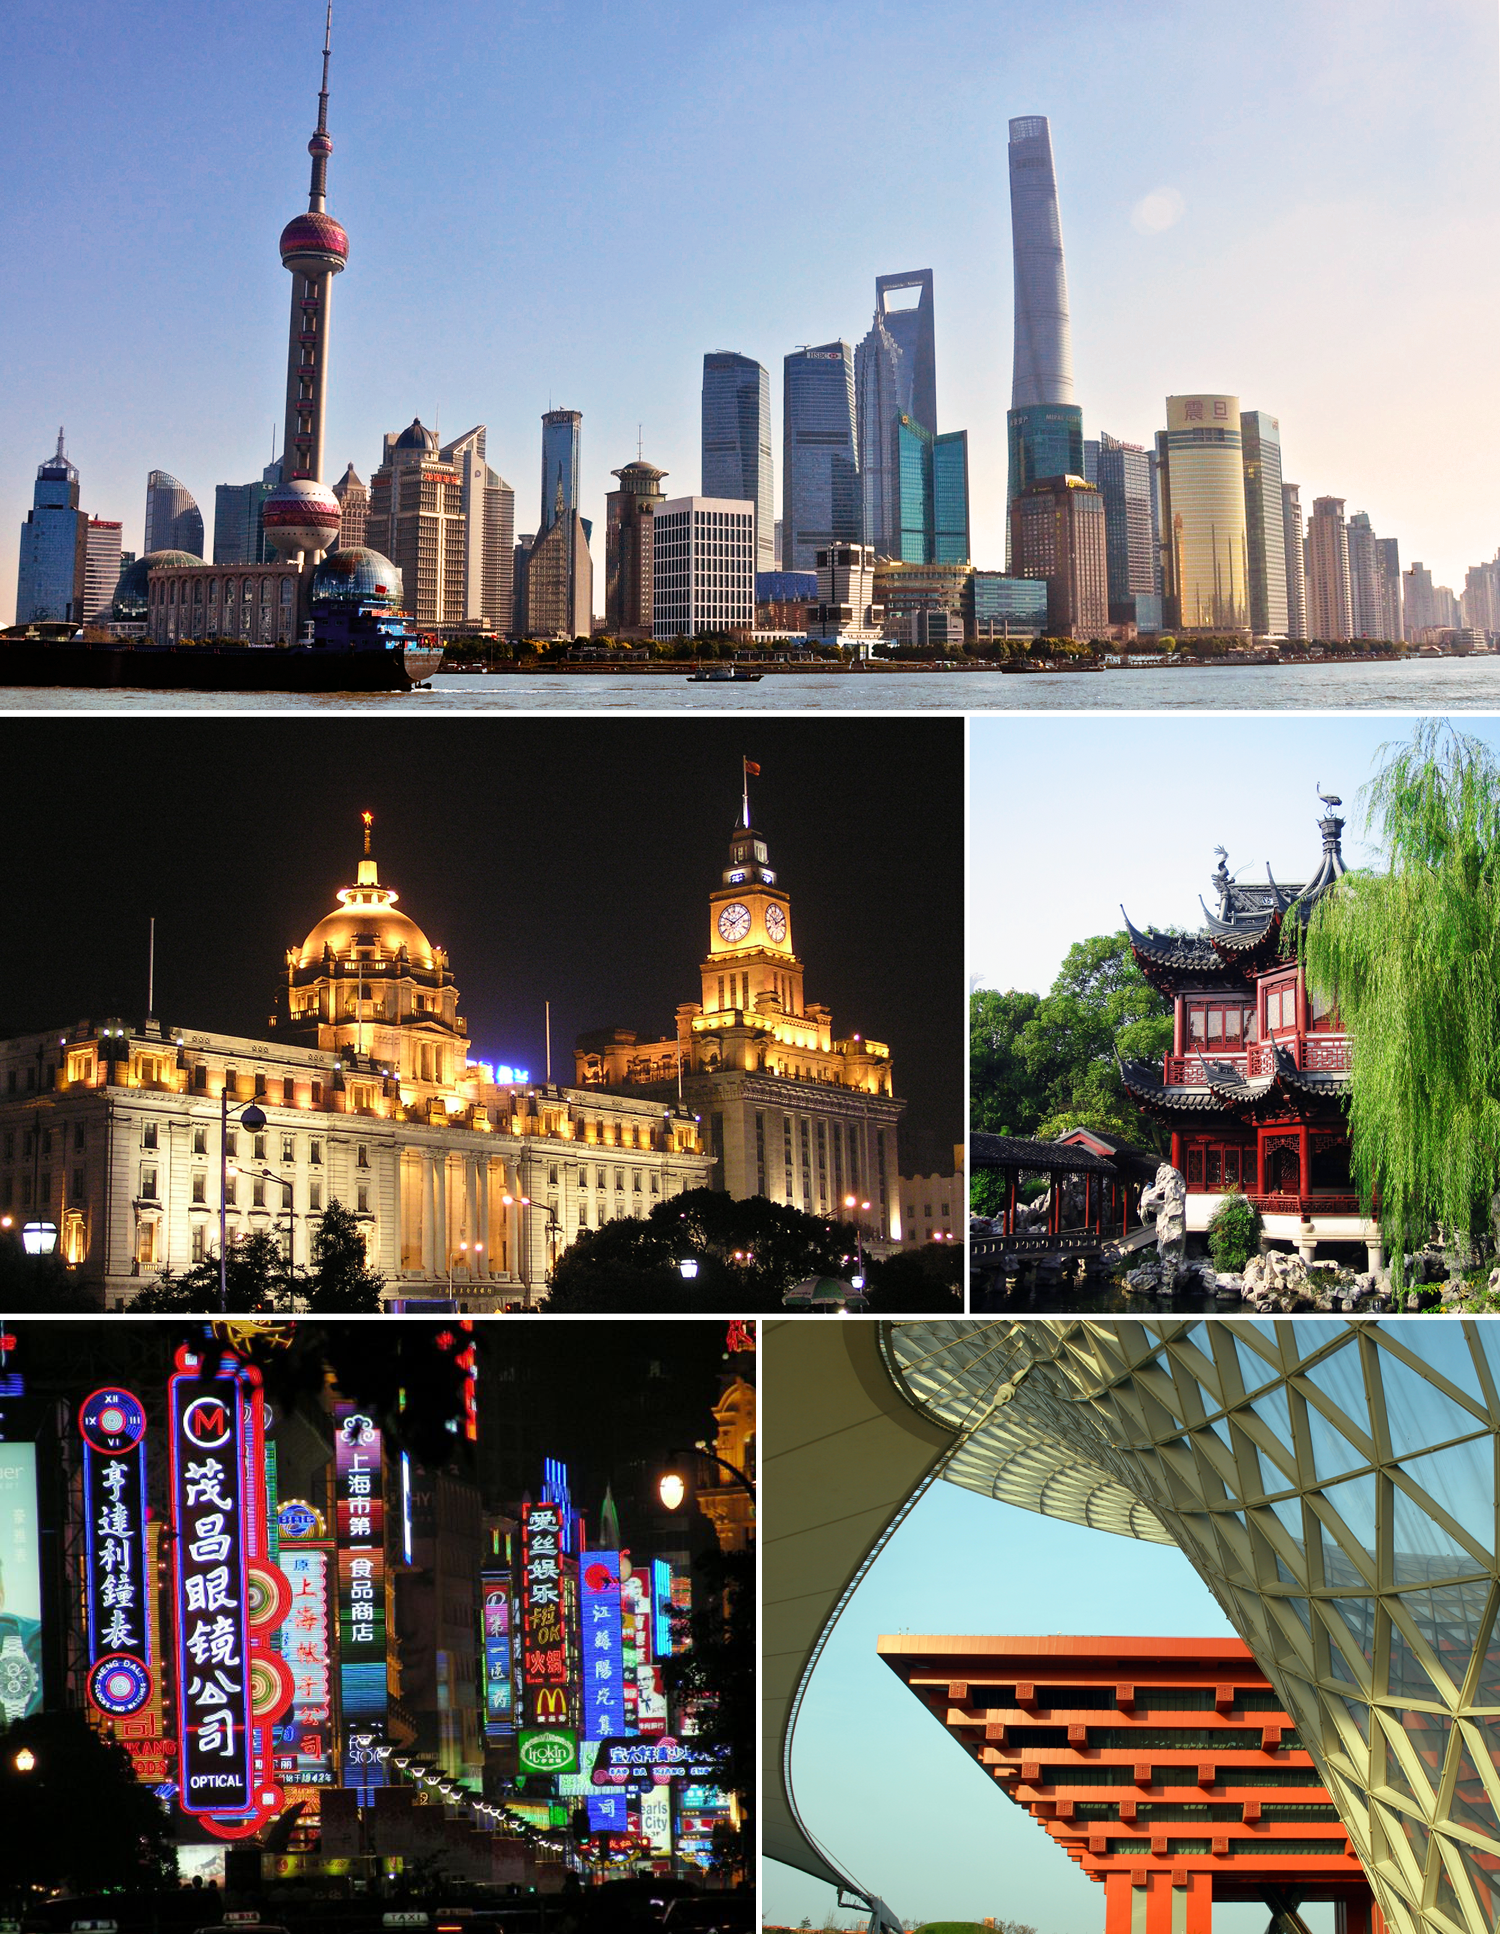 http://upload.wikimedia.org/wikipedia/commons/d/de/Shanghai_montage.png